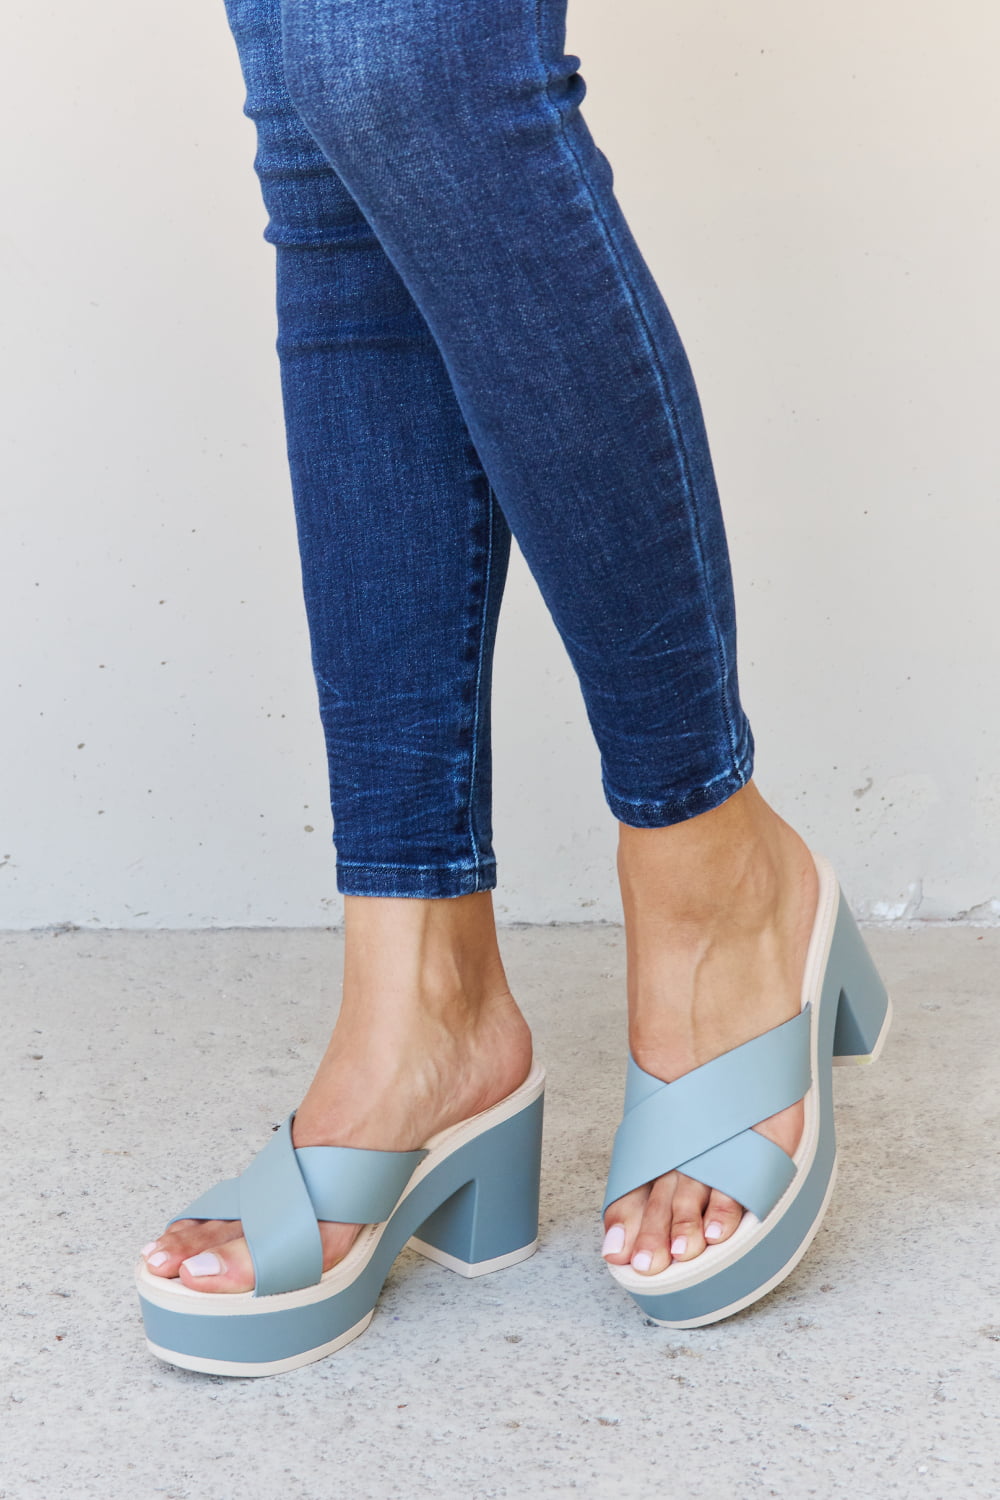 Weeboo Cherish The Moments Contrast Platform Sandals in Misty Blue - Guy Christopher 